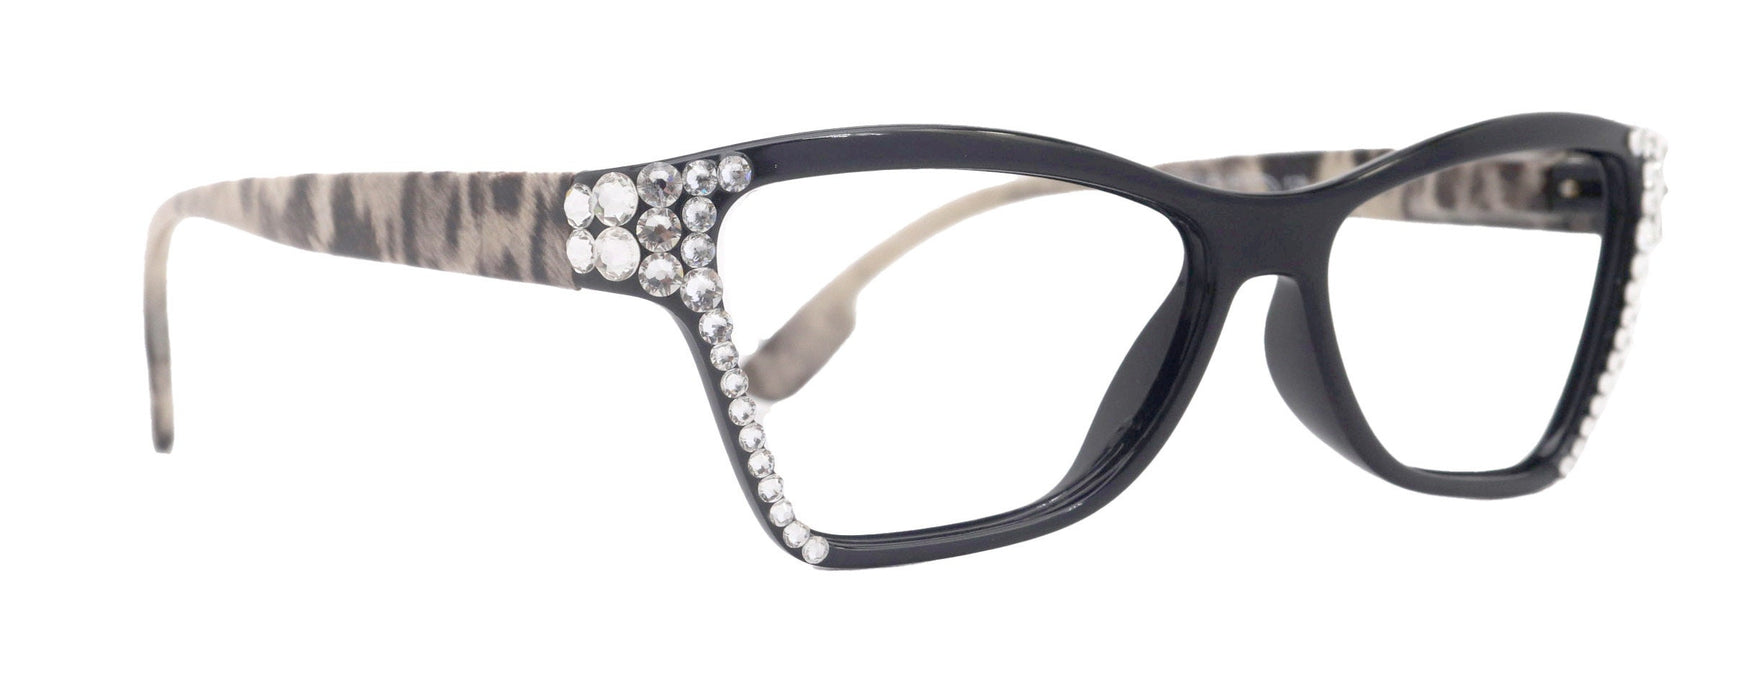 Avian, (Bling) Women Reading Glasses w (Clear) Genuine European Crystals, Magnifying Cat Eye (Black) NY Fifth Avenue